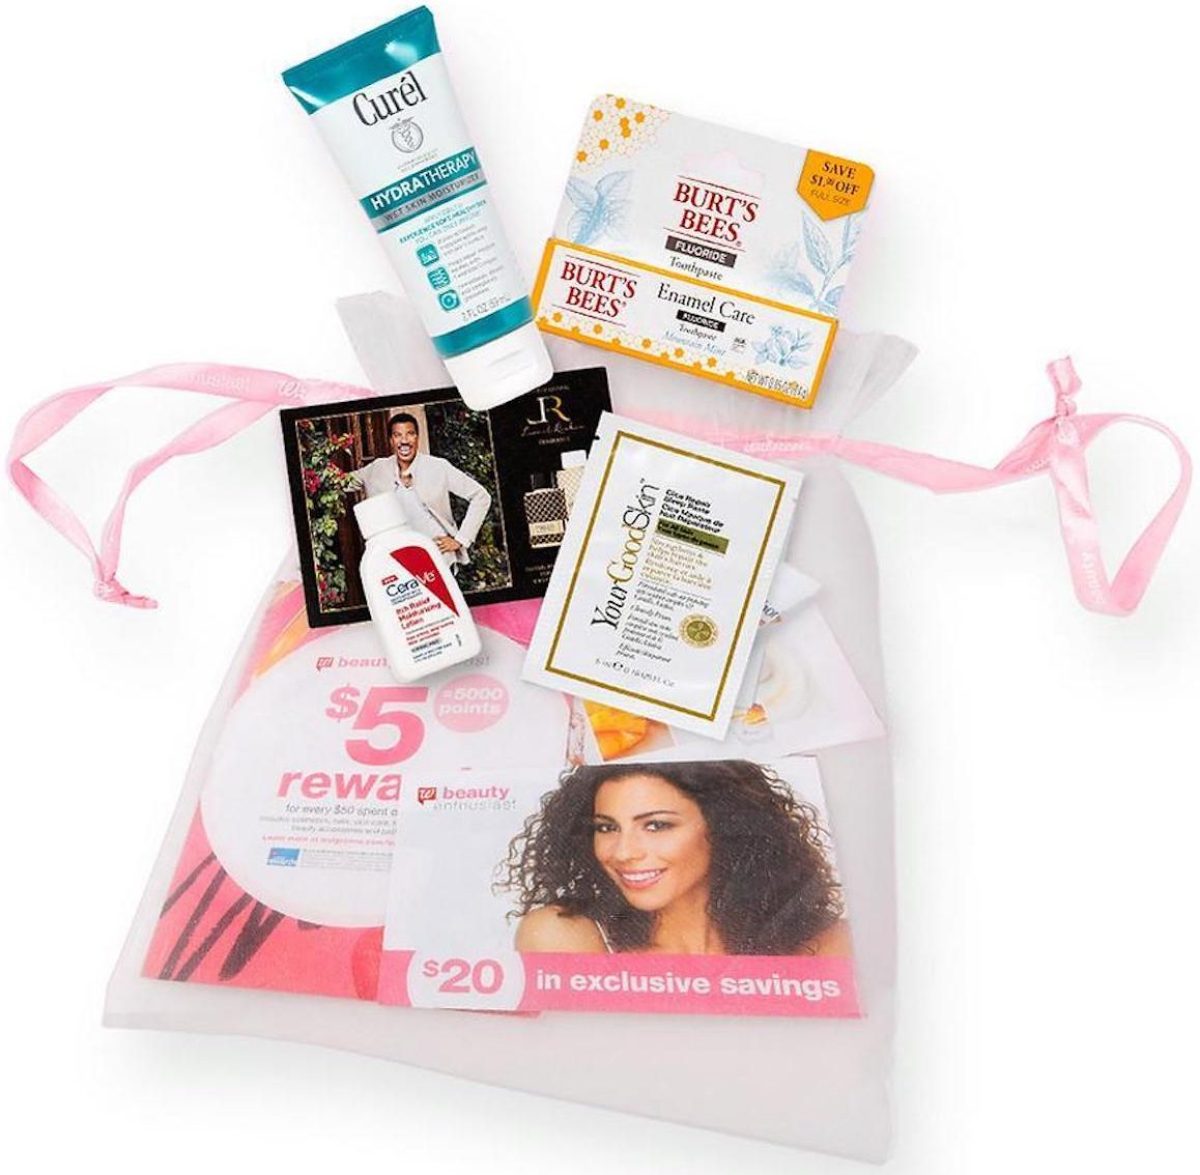 Walgreens beauty sample gift set with curel lotion, burt's bee's enamel care, and more